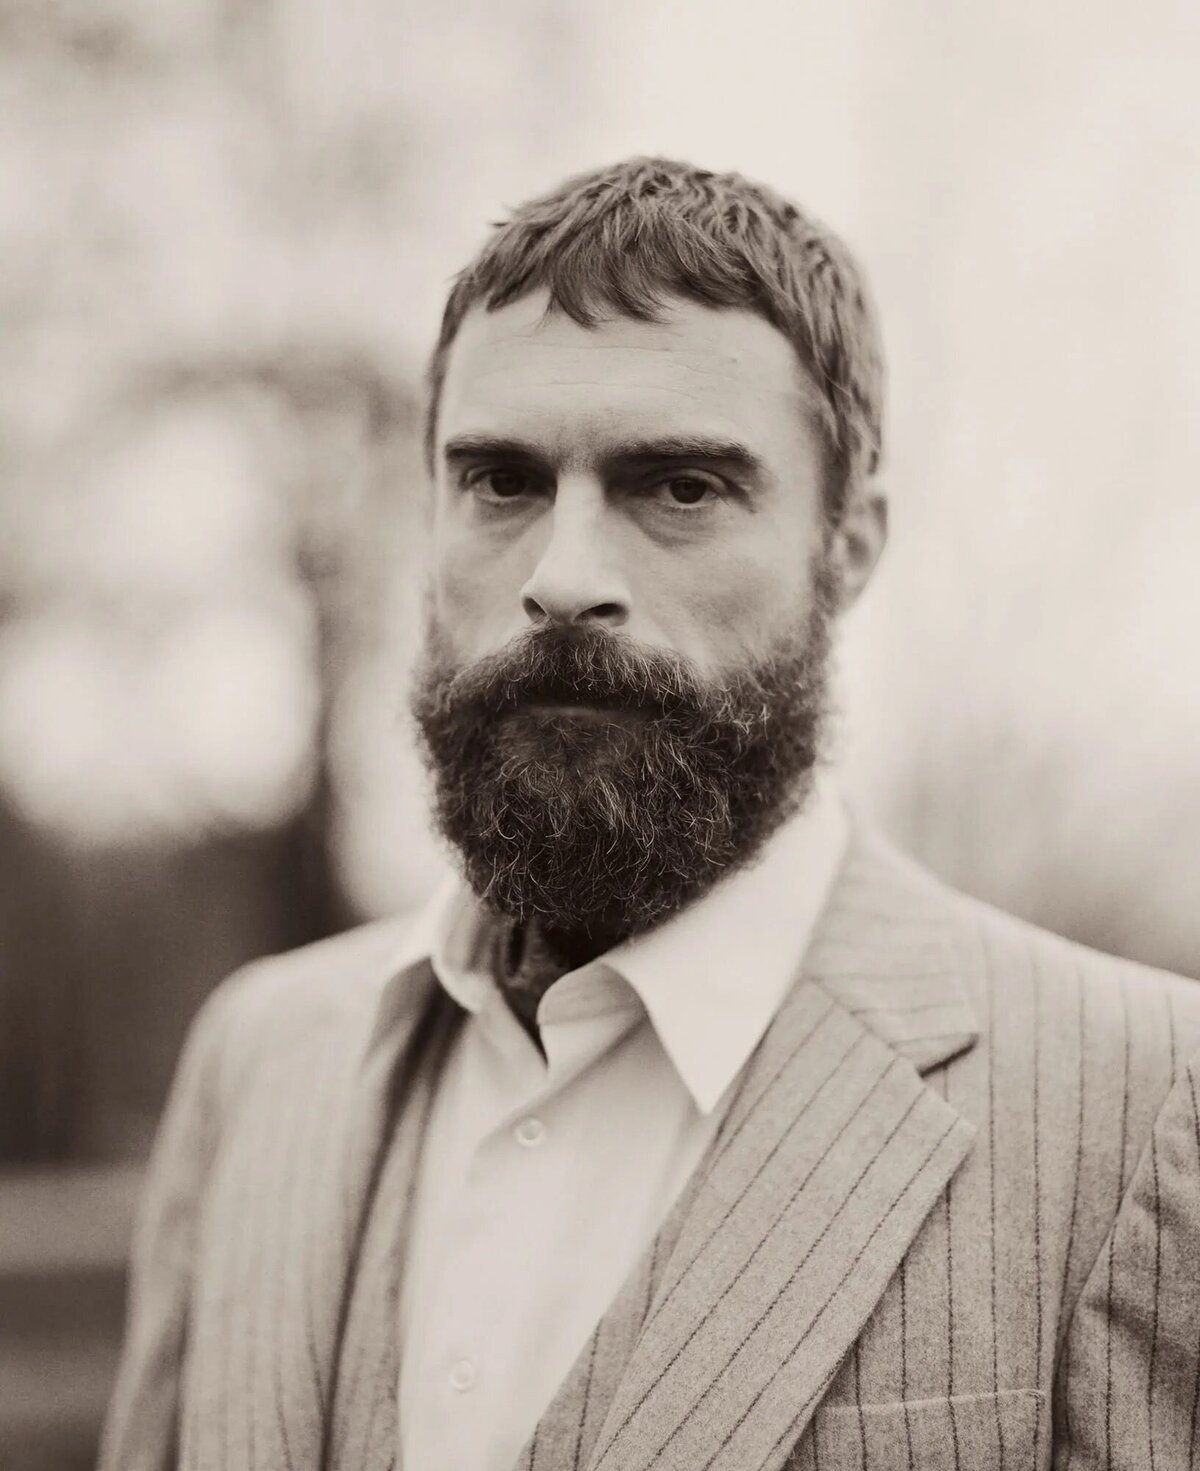 A portrait of a bearded man in a pinstripe suit, looking directly at the camera with an intense and distinguished gaze.